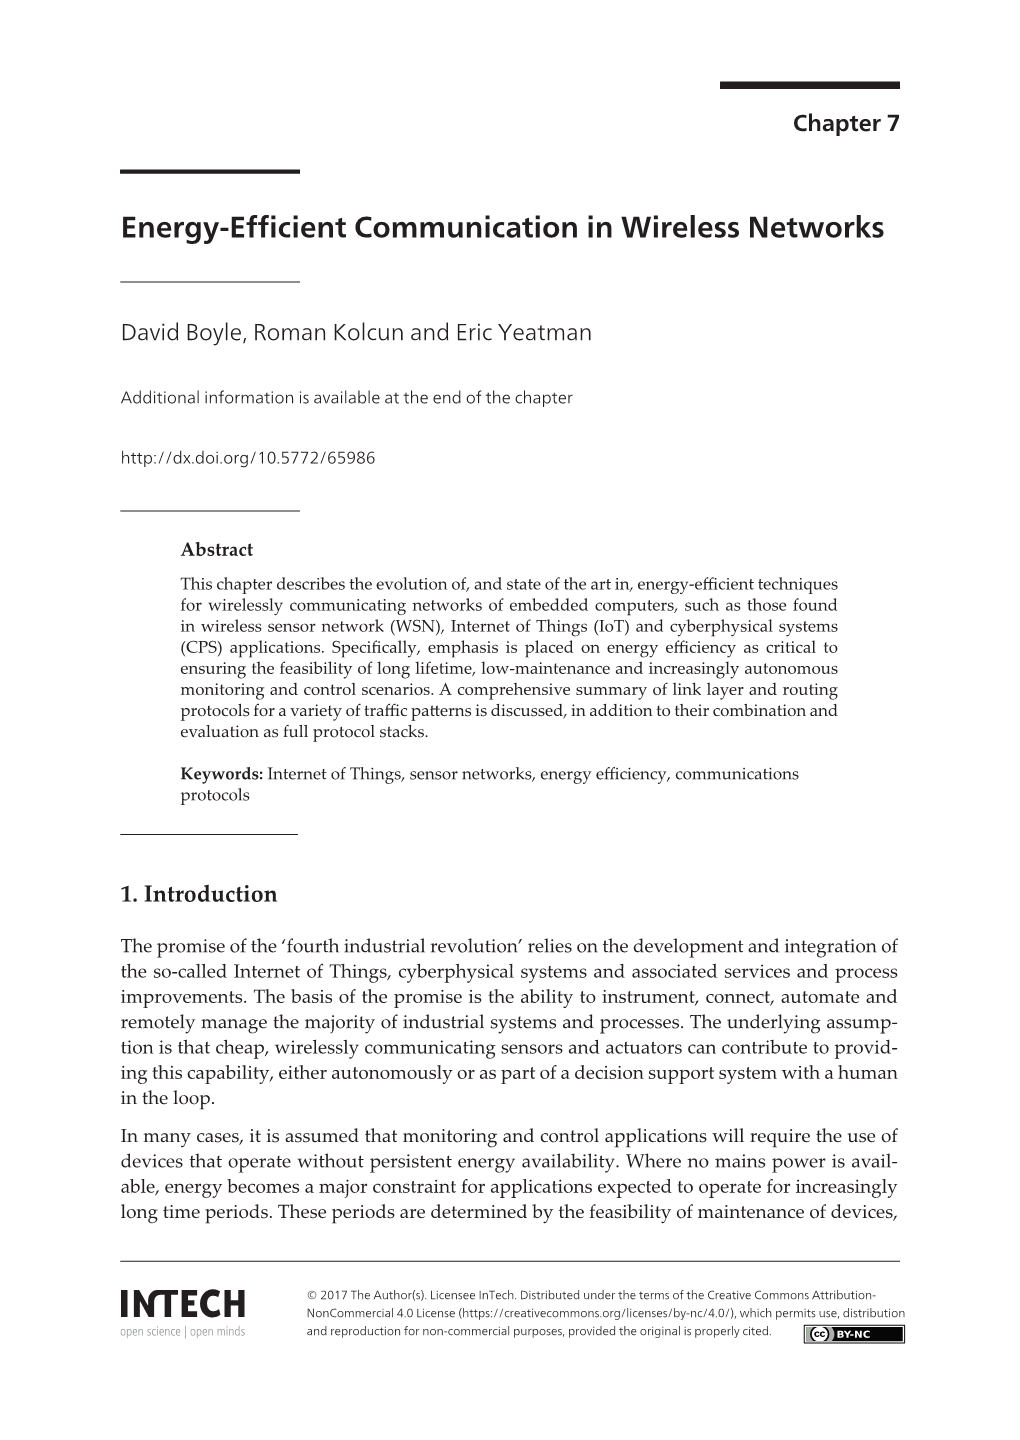 Energy-Efficient Communication in Wireless Networks Energy-Efficient Communication in Wireless Networks